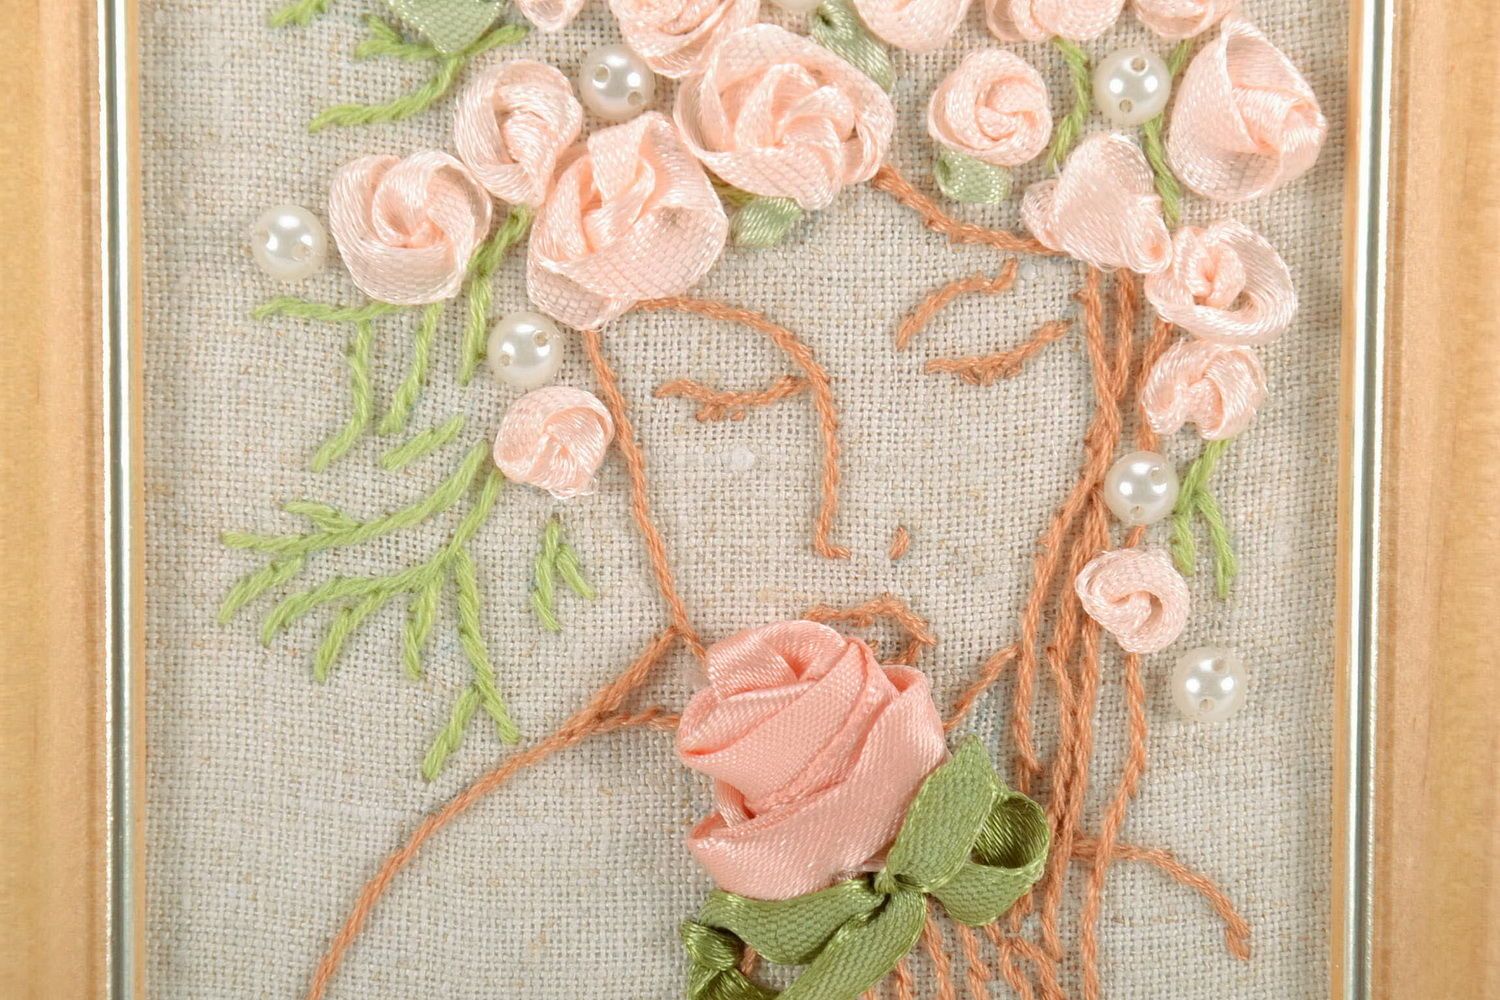 Picture embroidered with ribbons photo 2